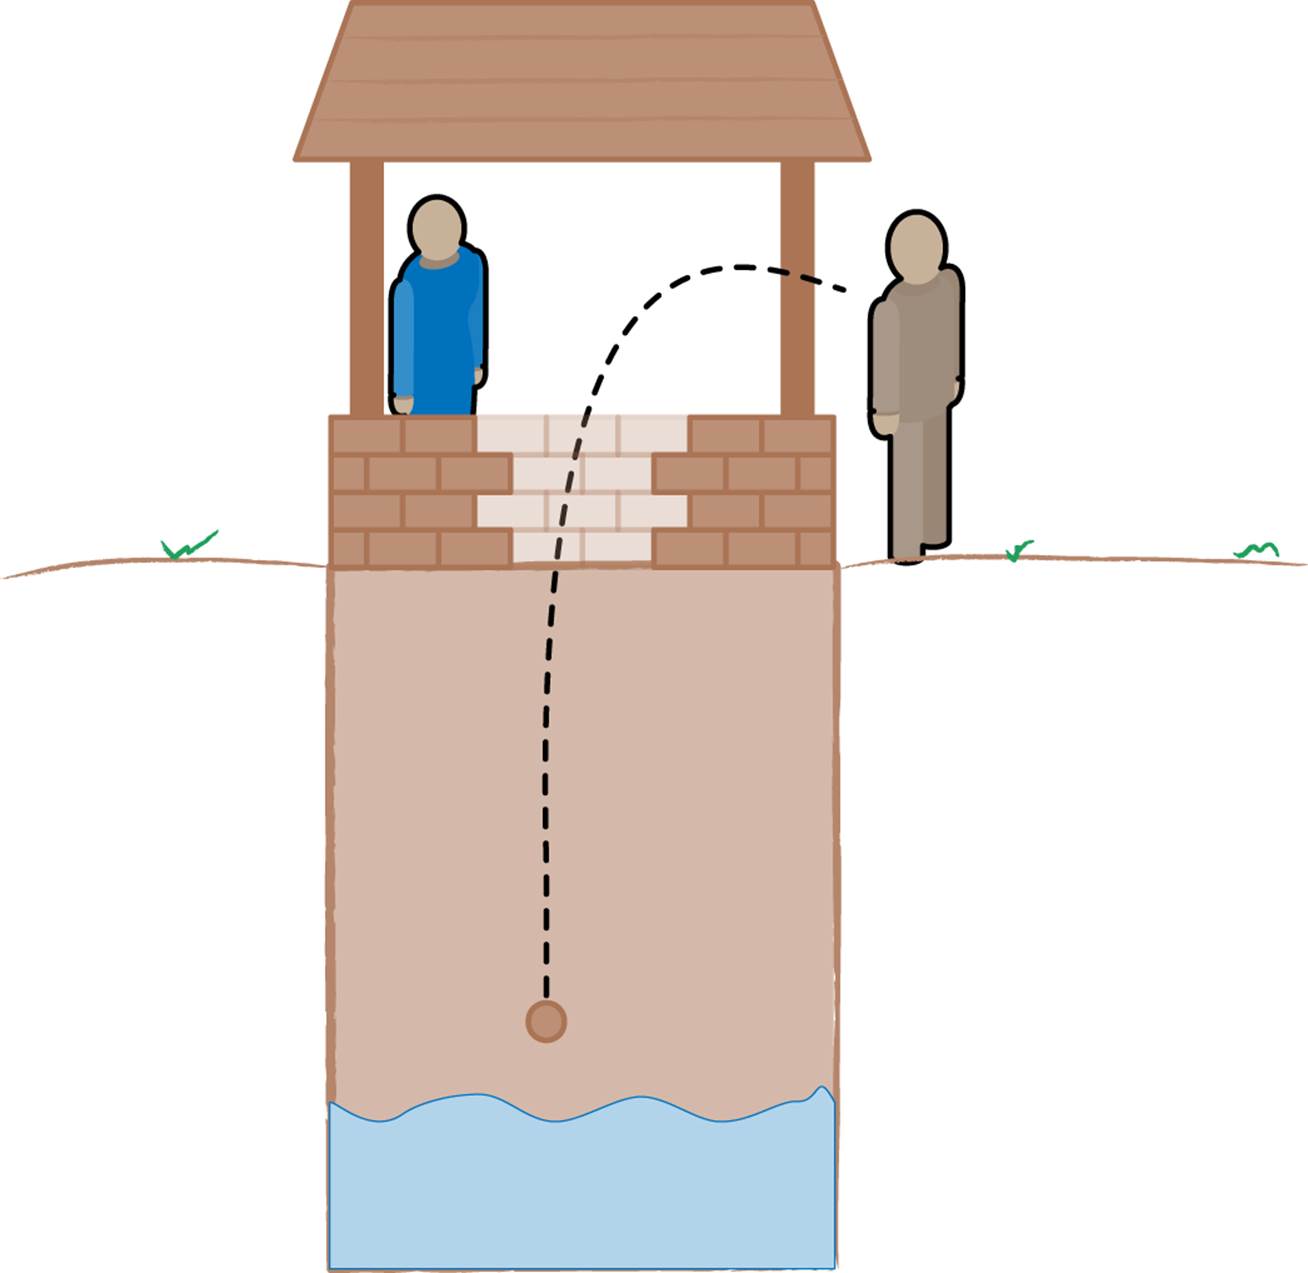 A person throws a pebble down a well. The stone is halfway down. The person is waiting to hear the splash.